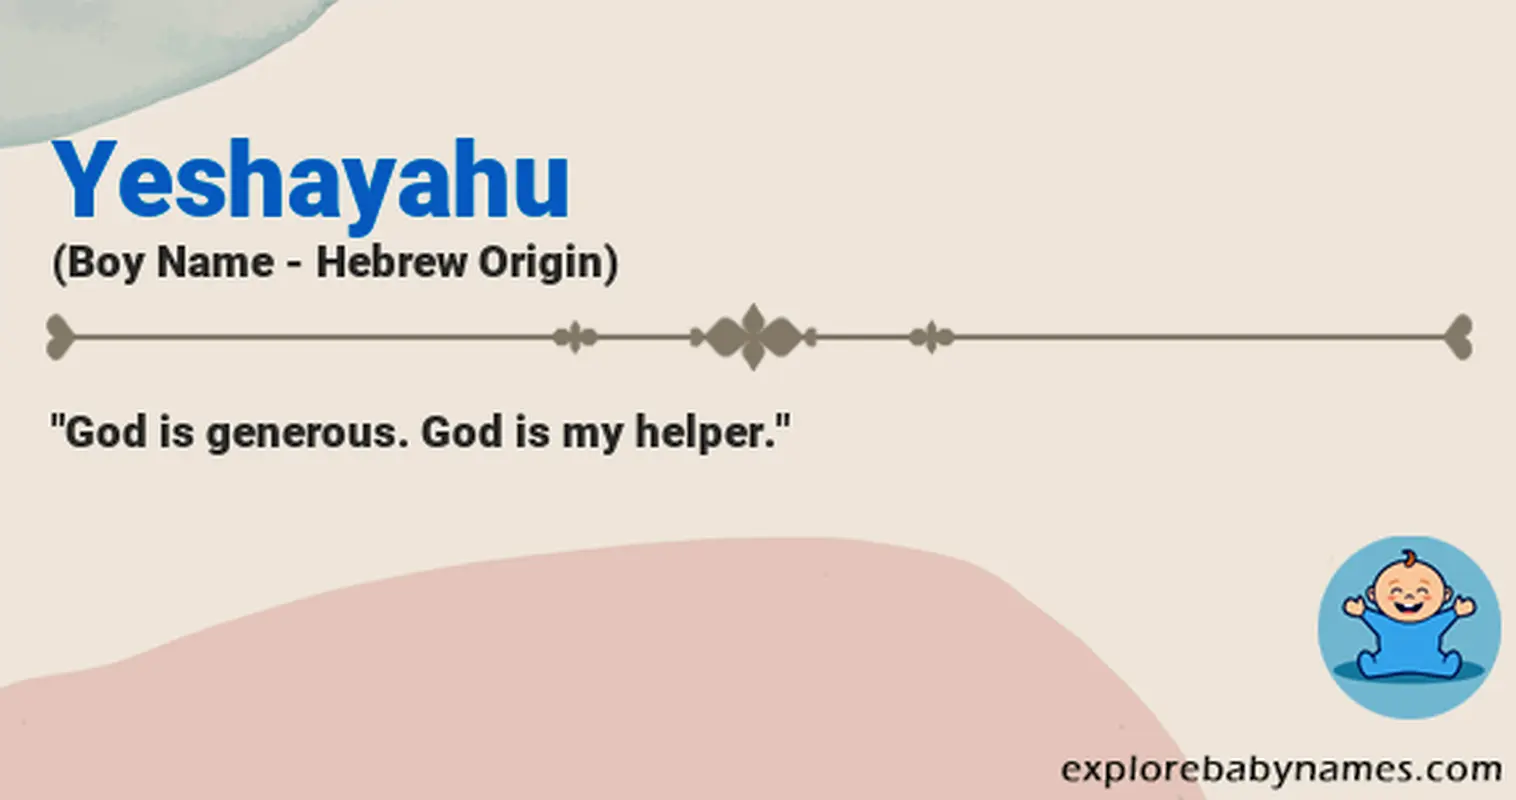 Meaning of Yeshayahu